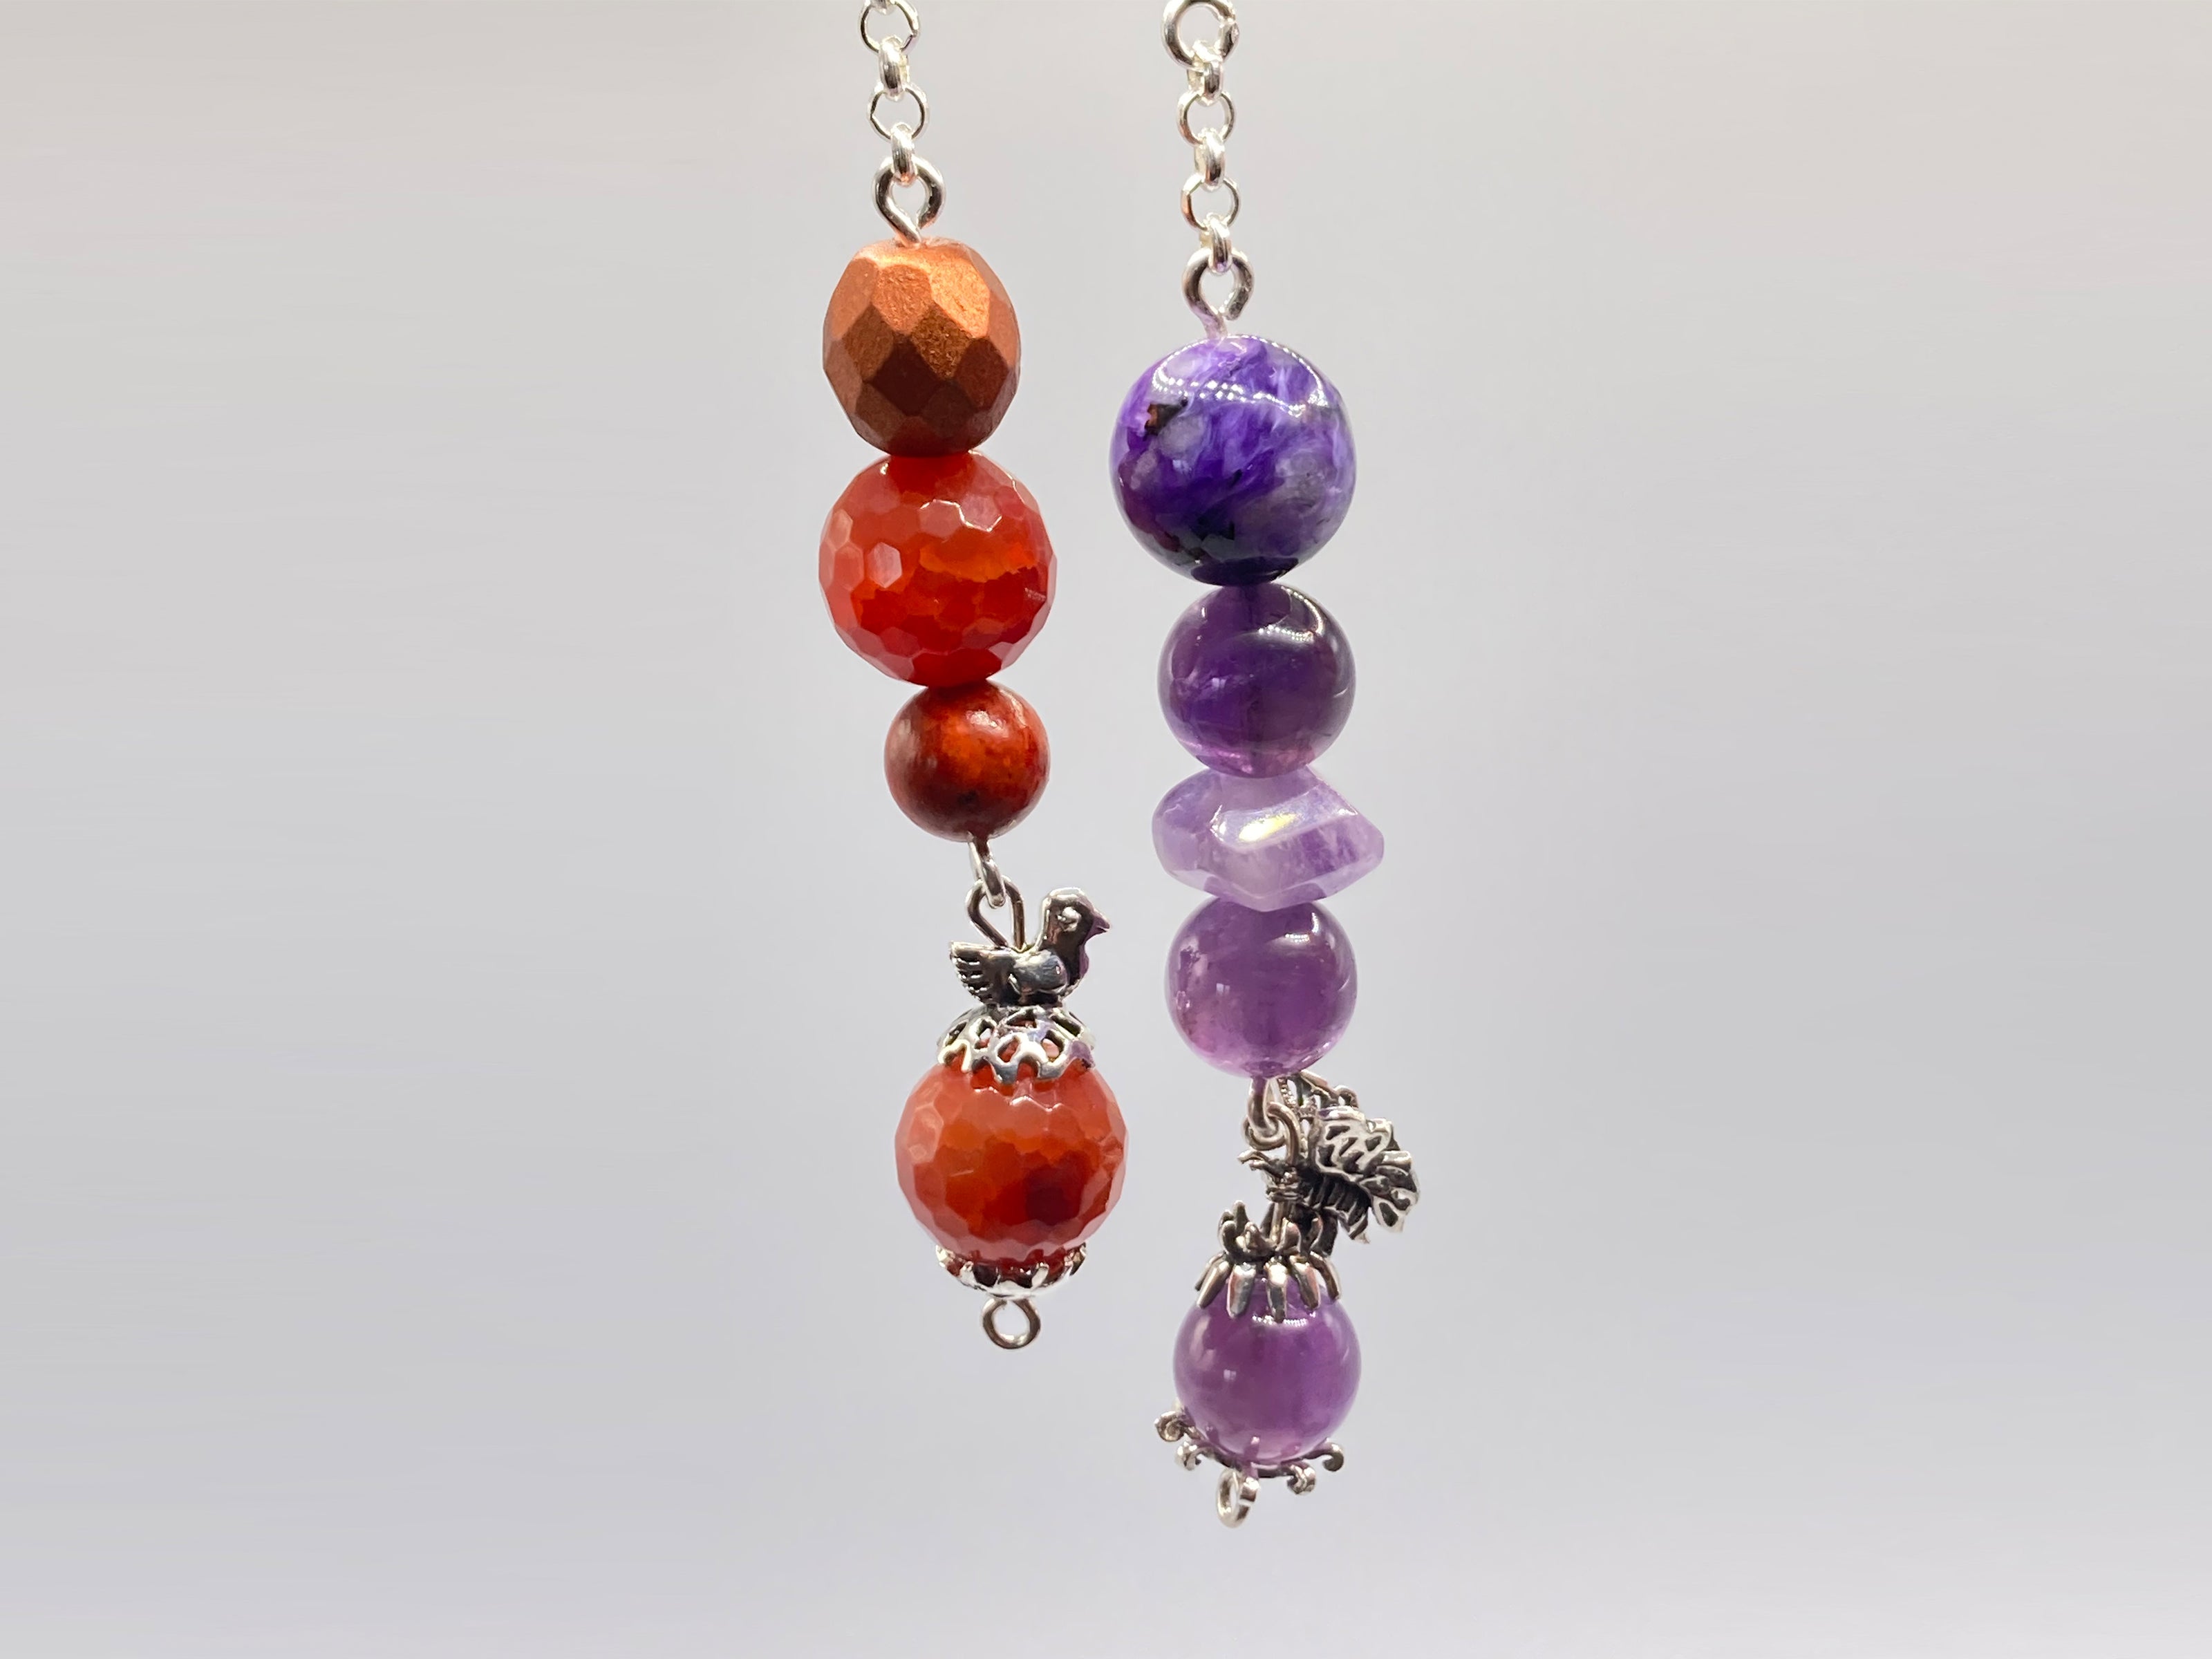 gemstone bobbles are good for storing thimbles on a necklace